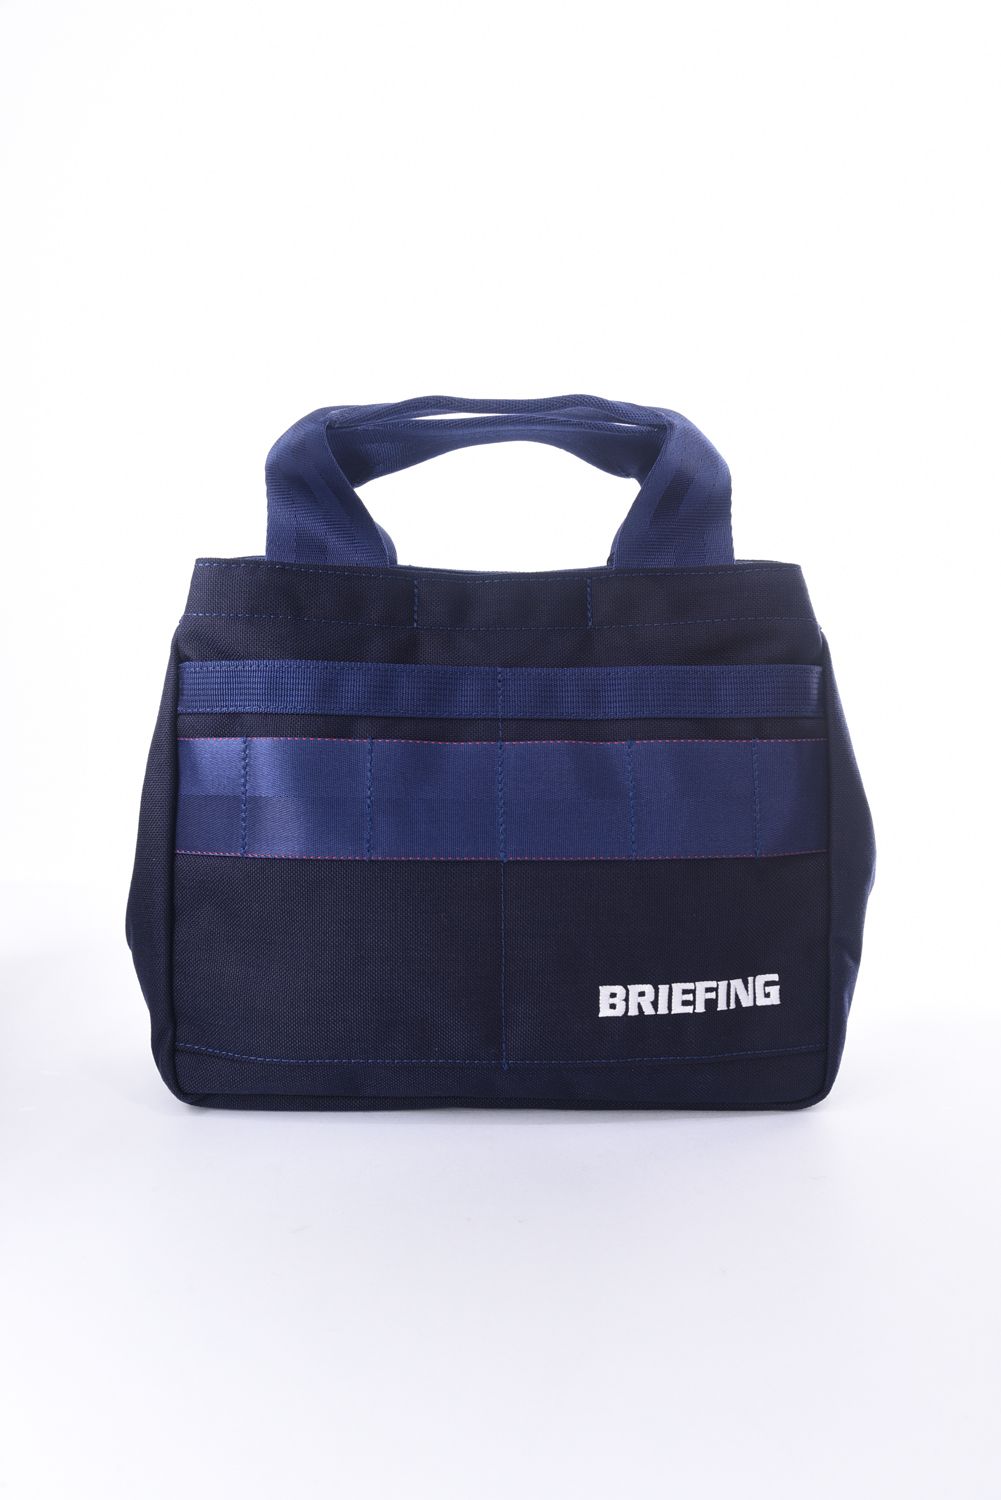 BRIEFING - 【STANDARD SERIES】 CLASSIC CART TOTE 1000D / カート 